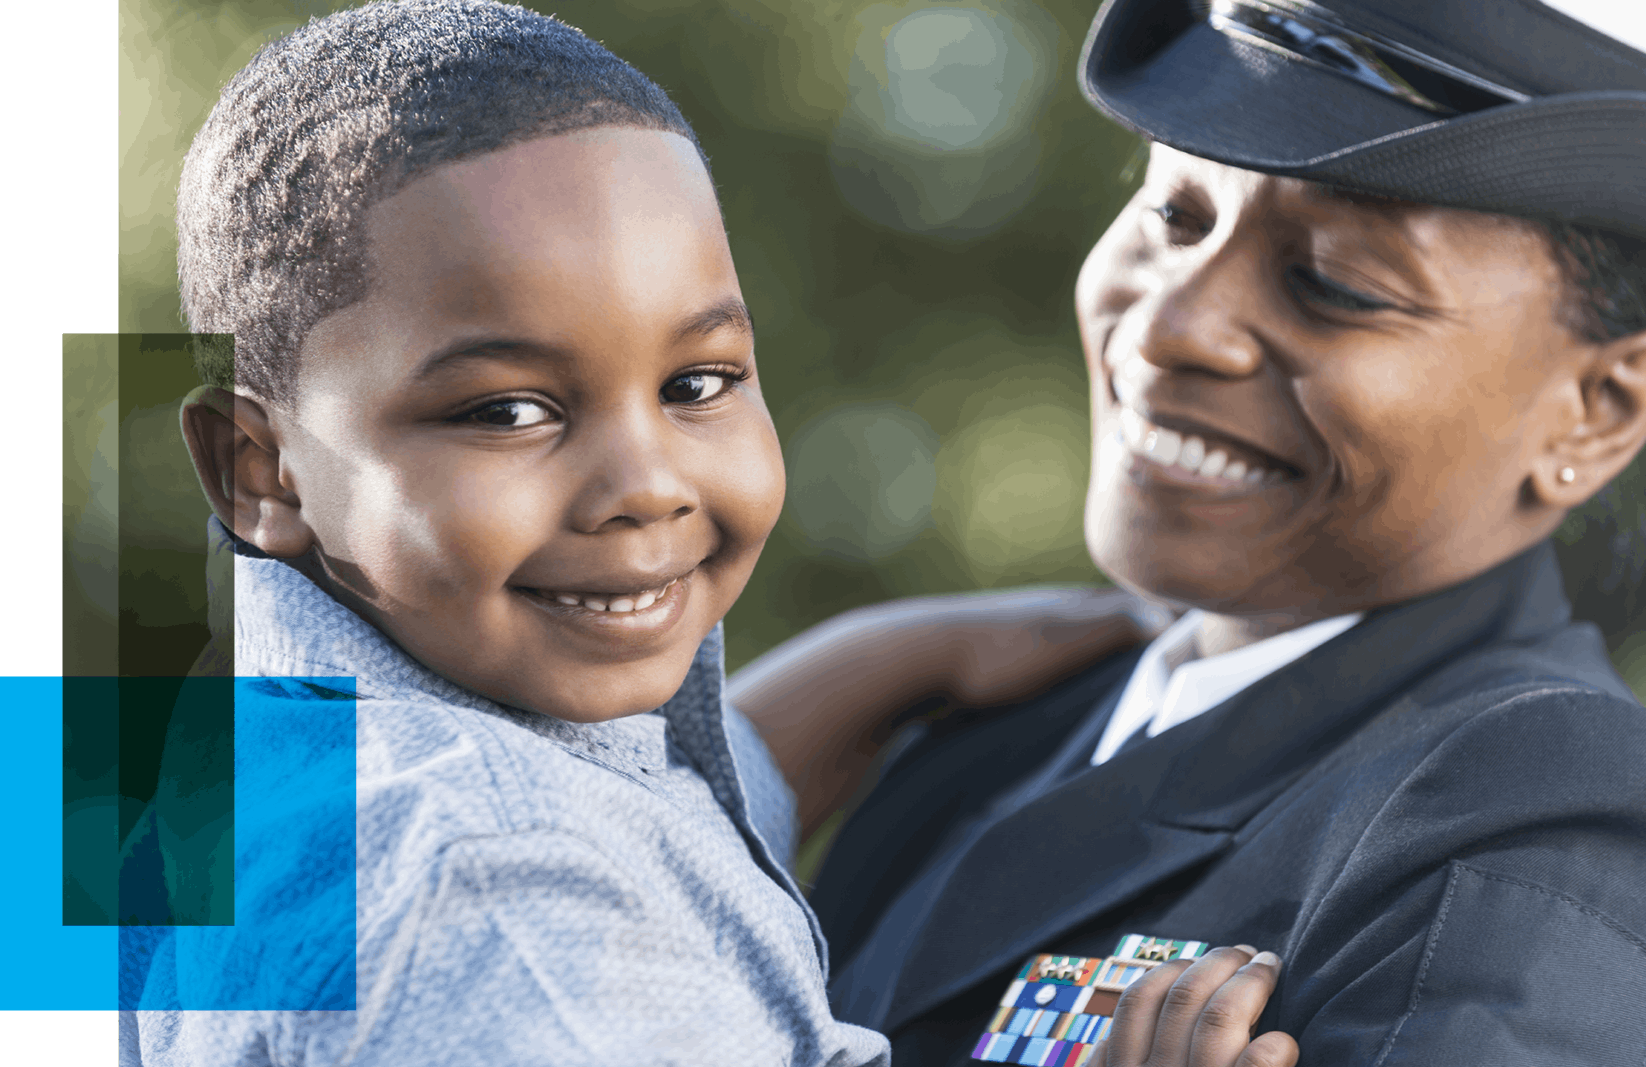 Image shows a black woman in naval uniform holding her child and smiling. The boy looks at the camera, also smiling.